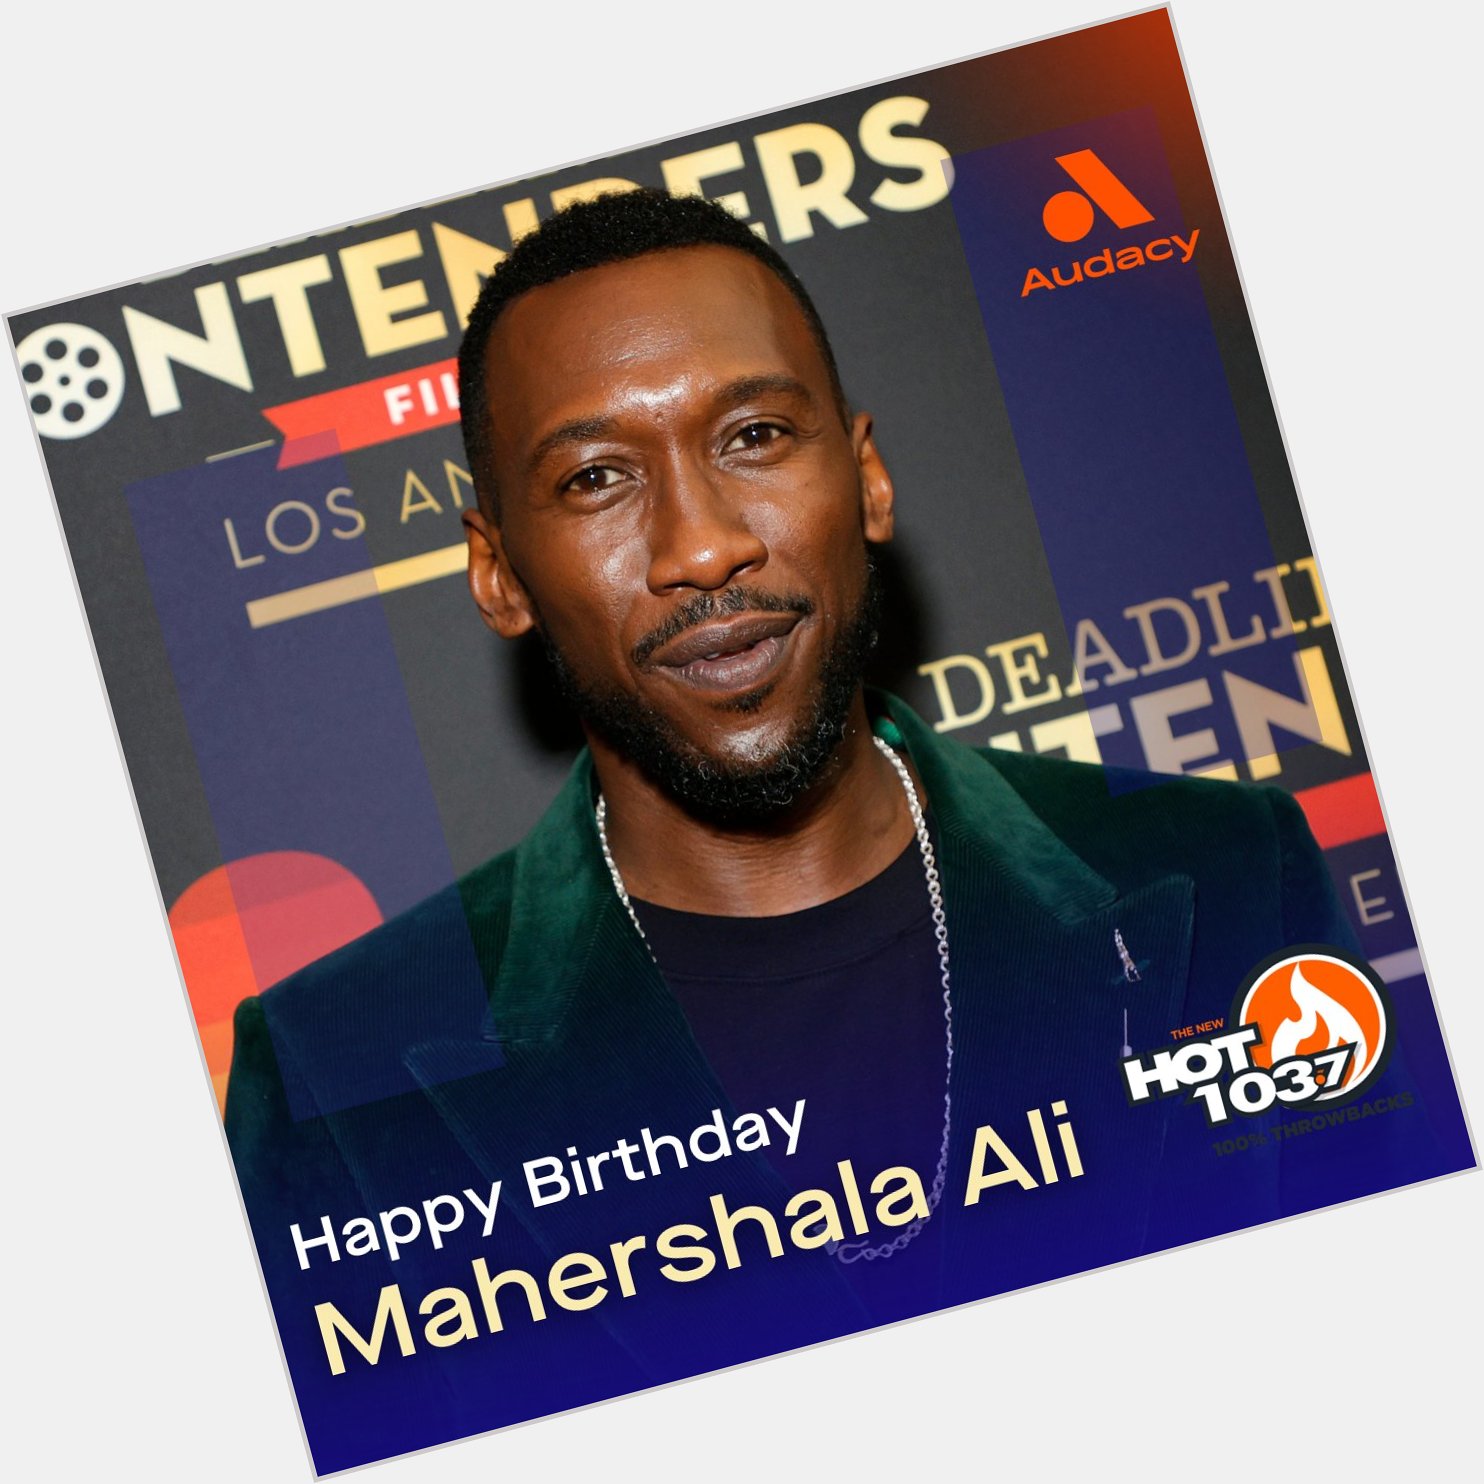 Happy 48th birthday to Mahershala Ali. Not gonna lie, I\m super excited to see him play \Blade\. 